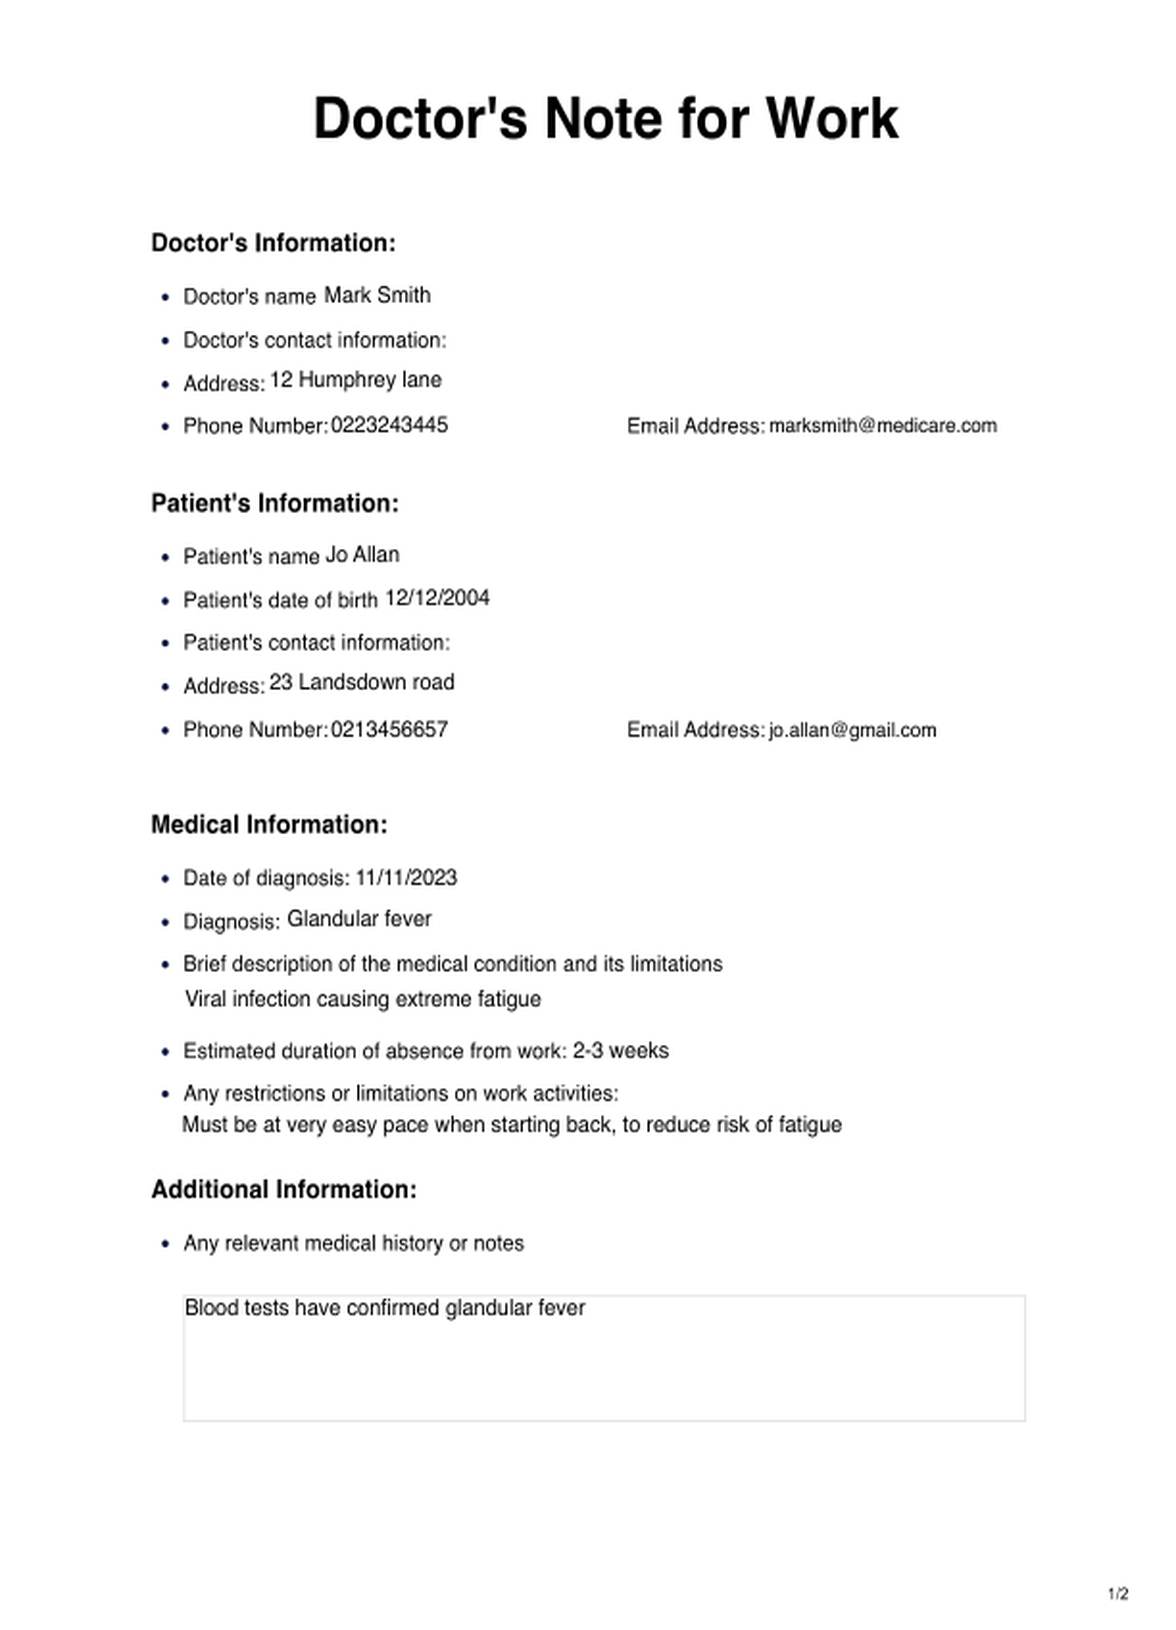 Doctor’s Note For Work Template PDF Example